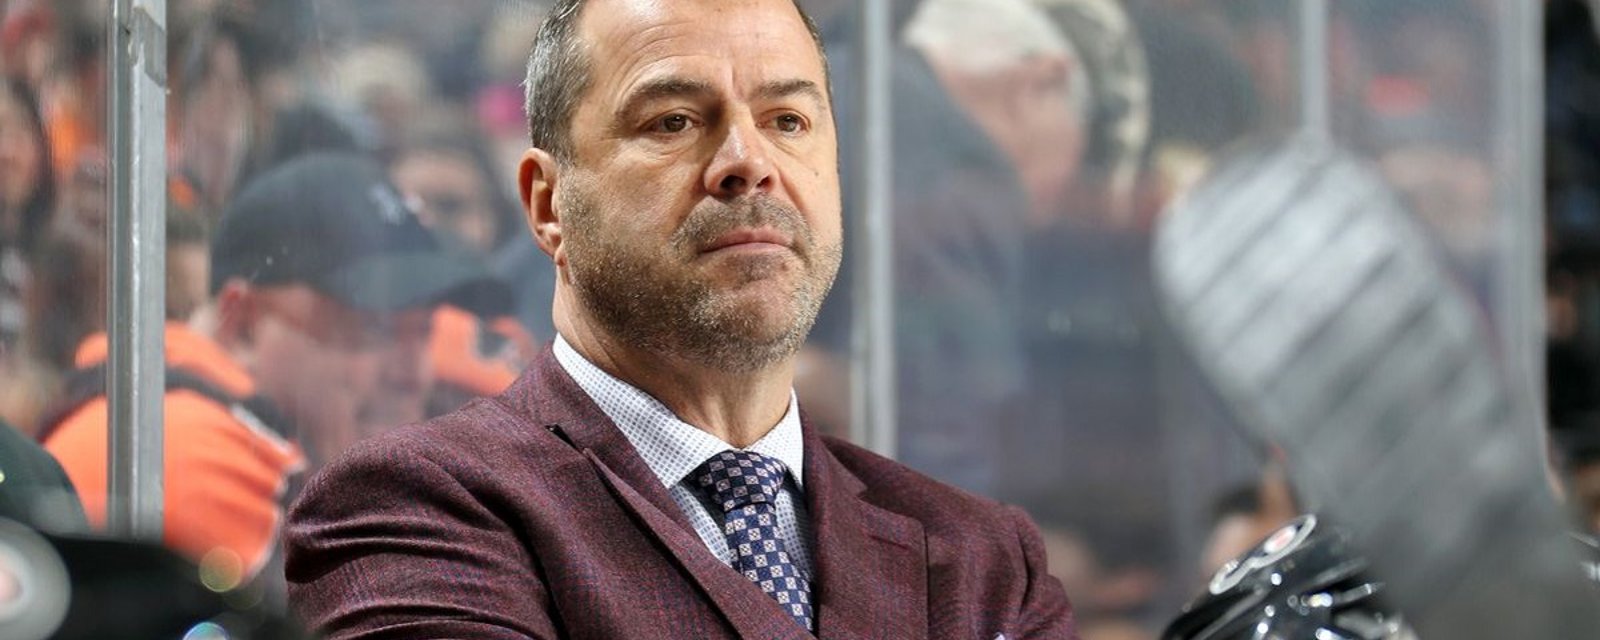 The NHL and the Flyers react to Lehner's allegations against Alain Vigneault.